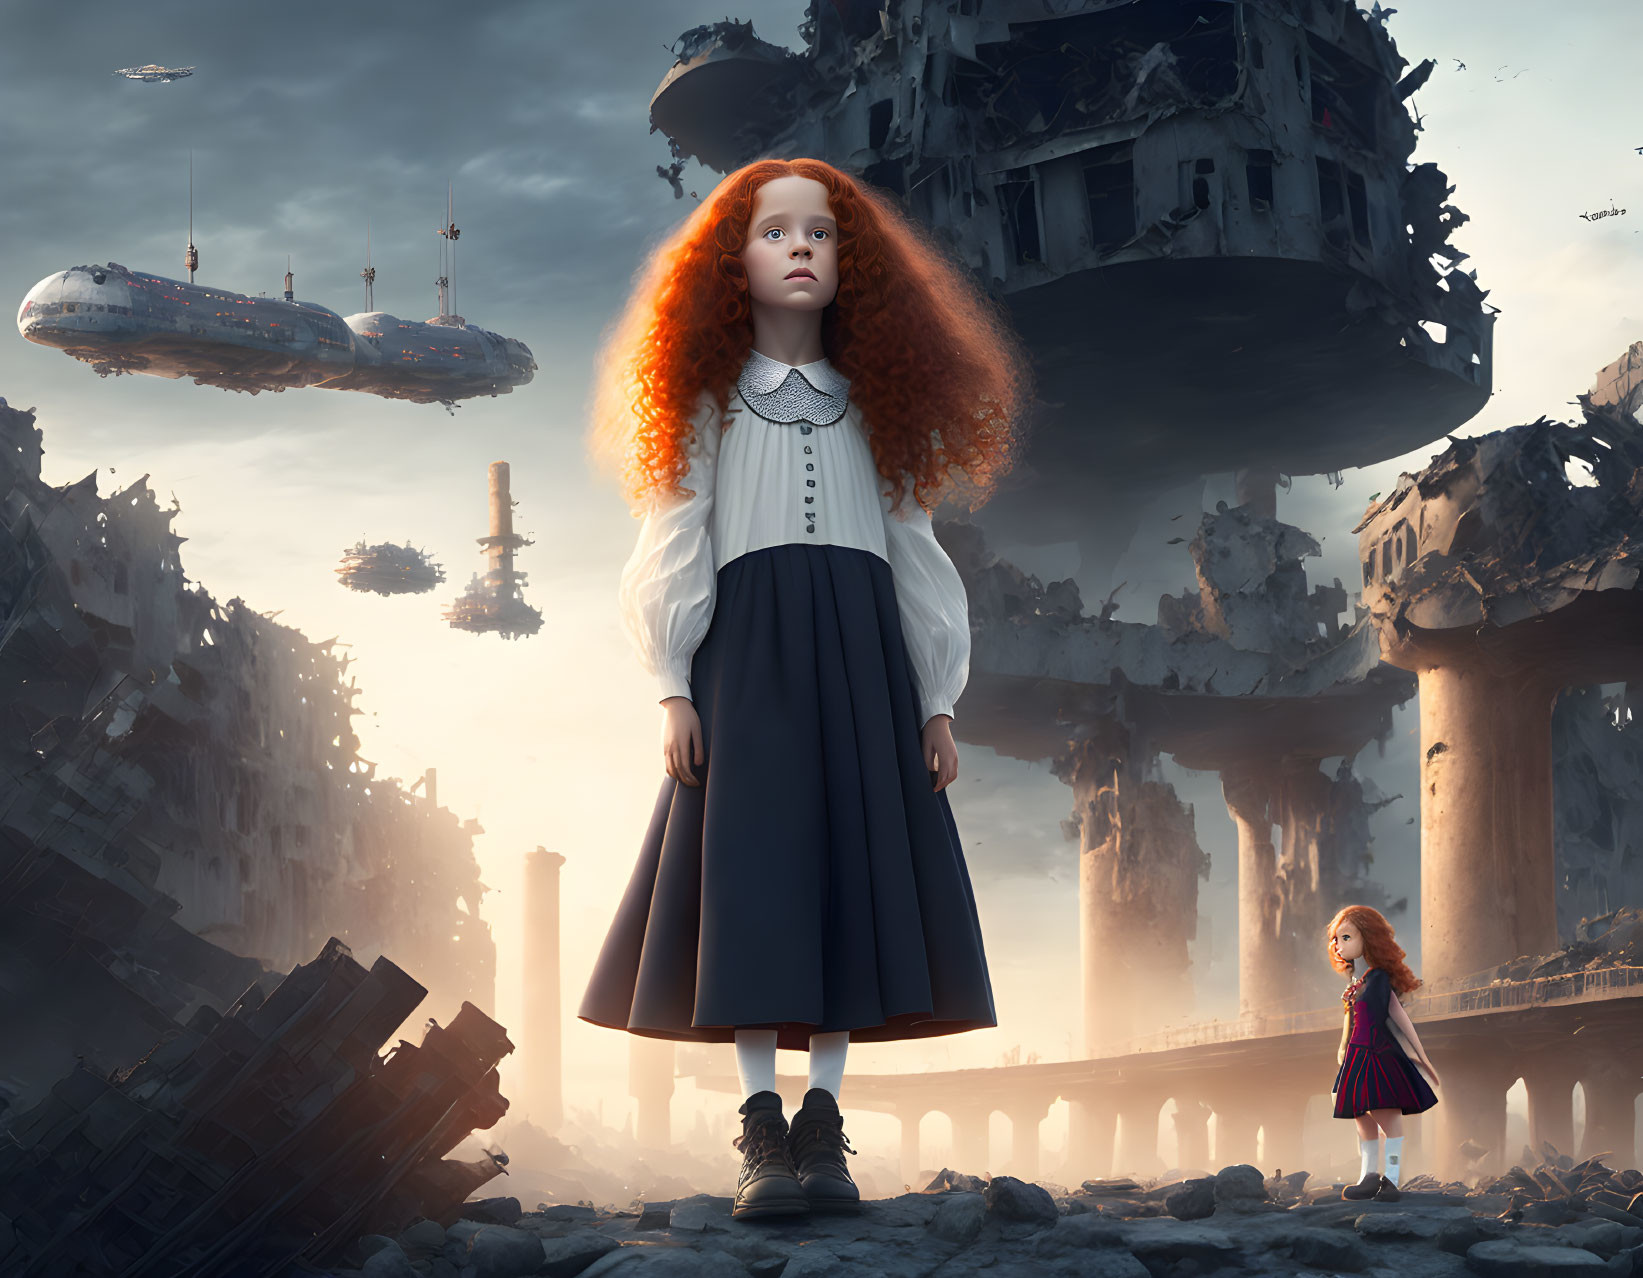 Red-haired young girl in surreal dystopian landscape with floating debris and miniature version.